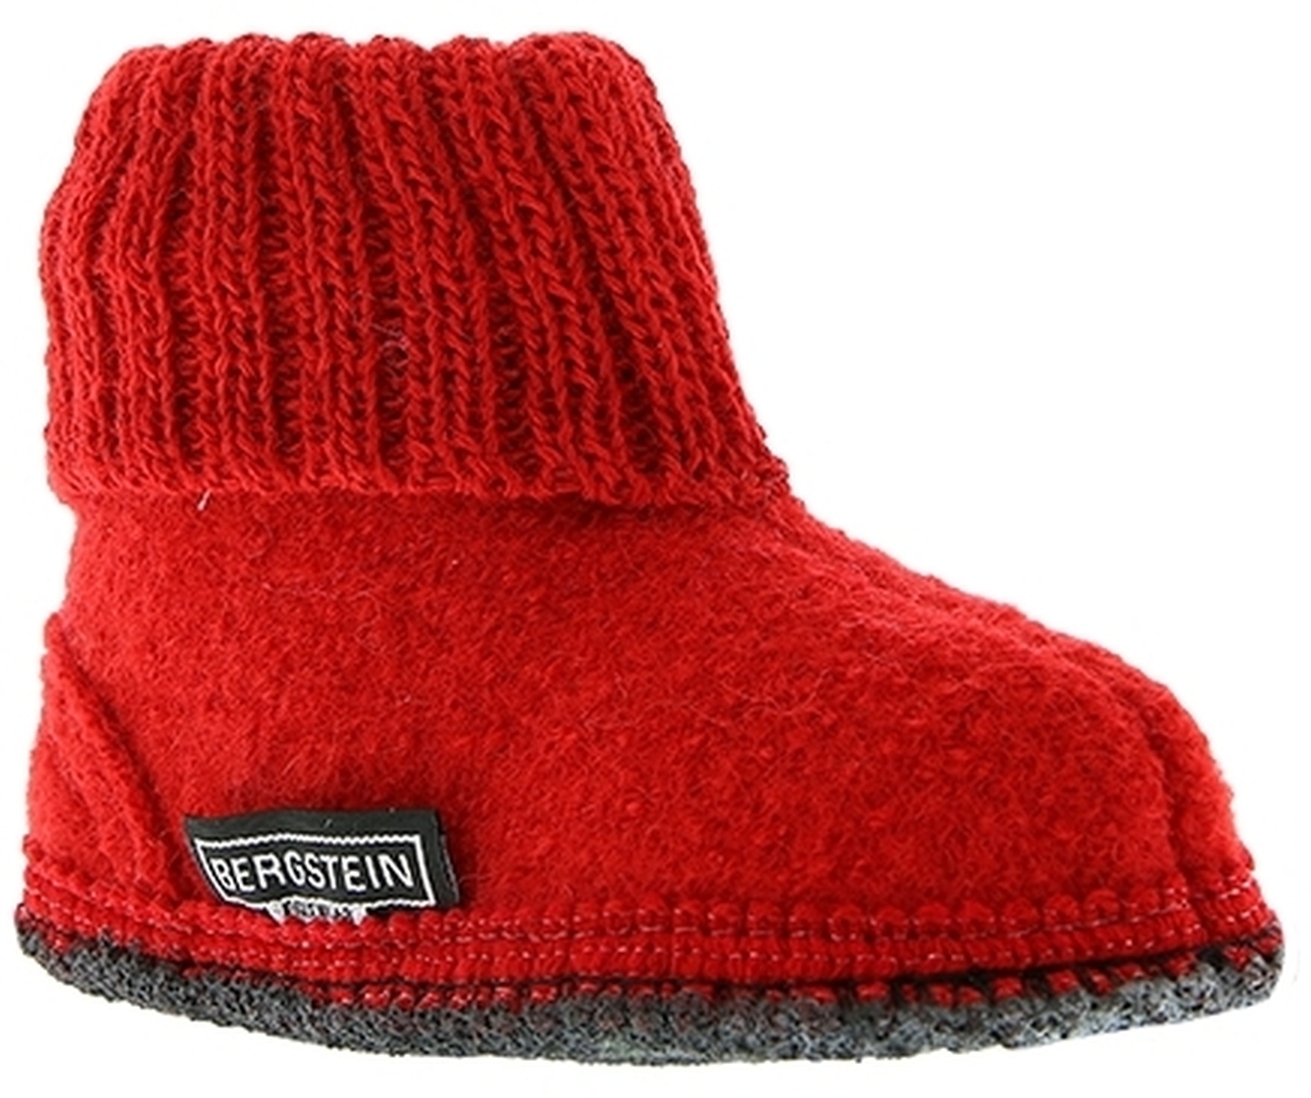 Bergstein Cozy Red Wool